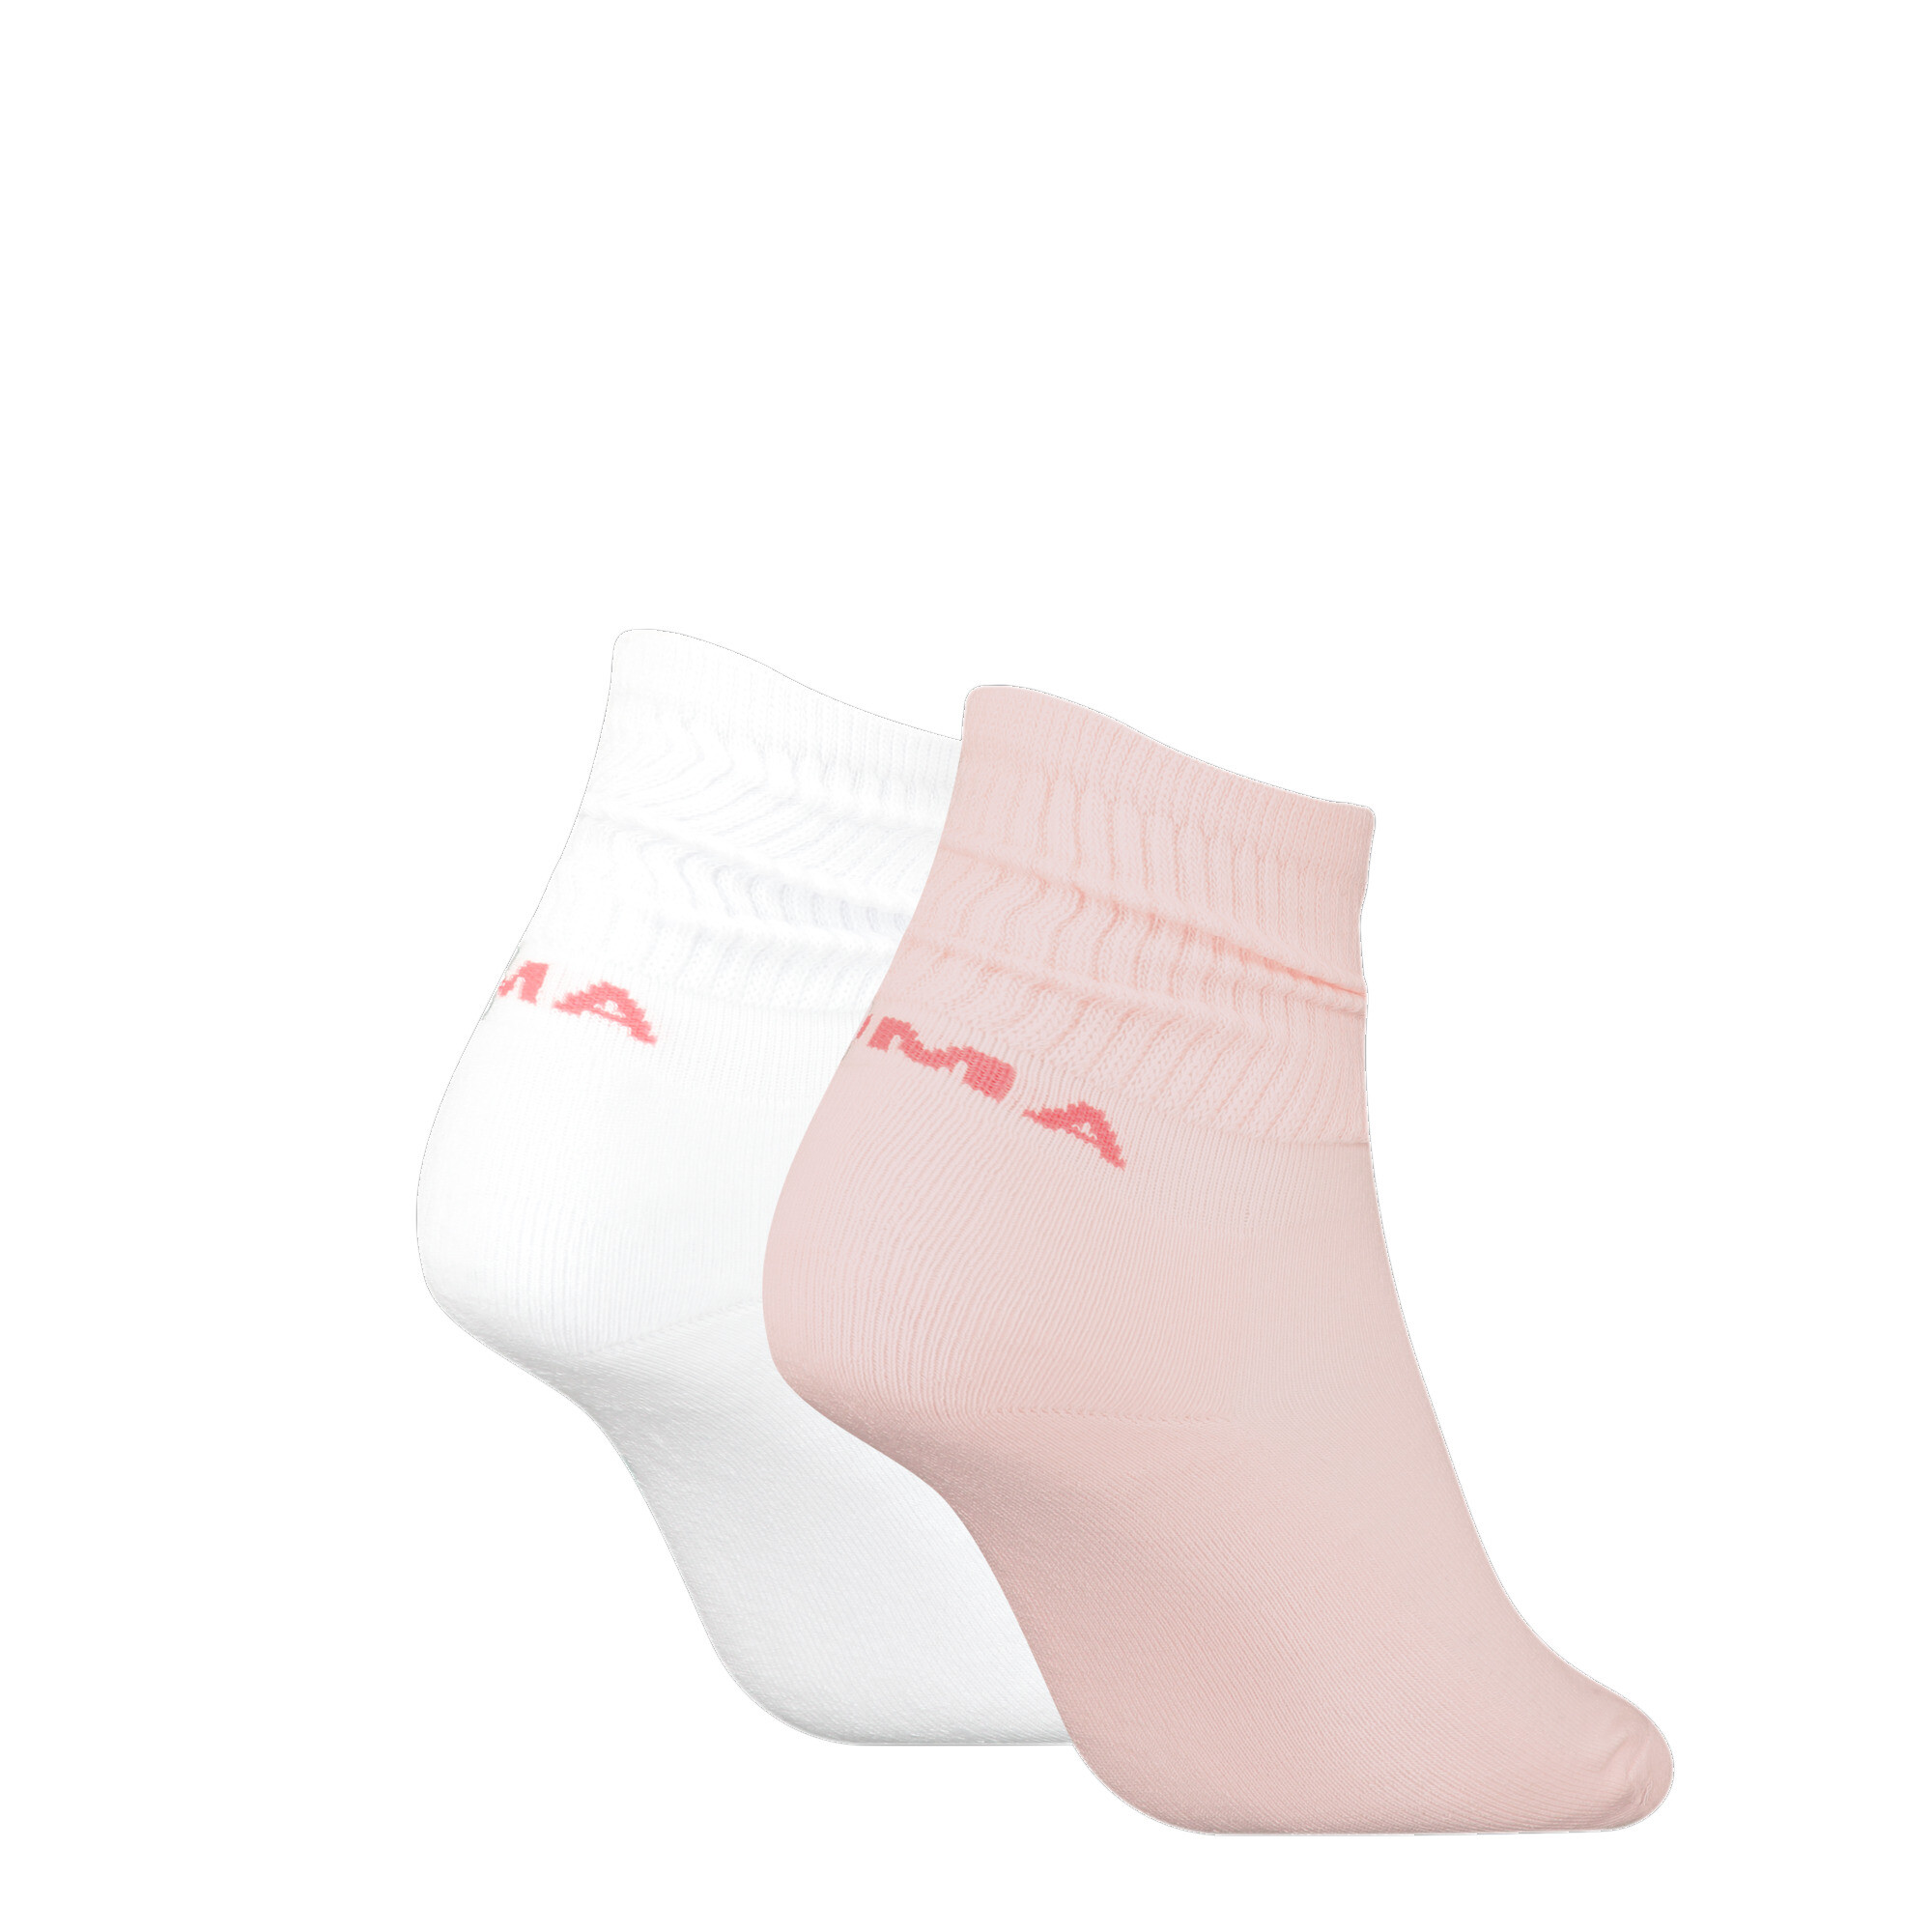 Women's PUMA Slouch Crew Socks 2 Pack In 70 - Pink, Size 39-42